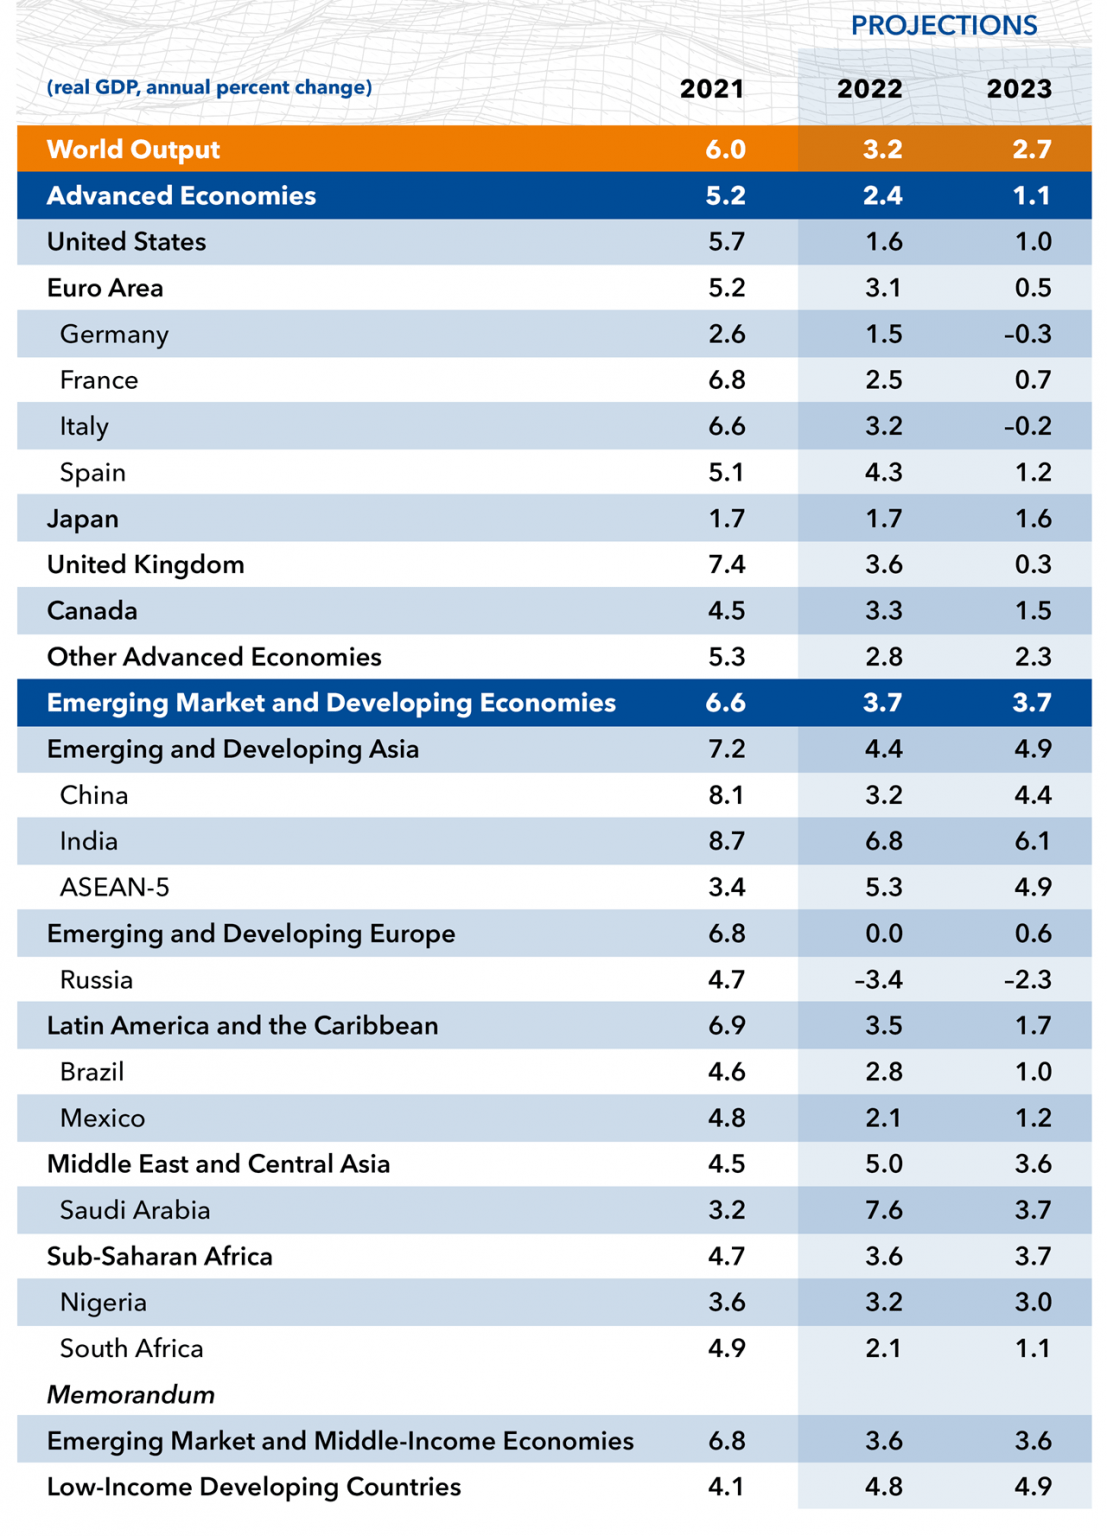 IMF Global Economic Growth Forecast Lowered to 2.7 in 2023. The Worst